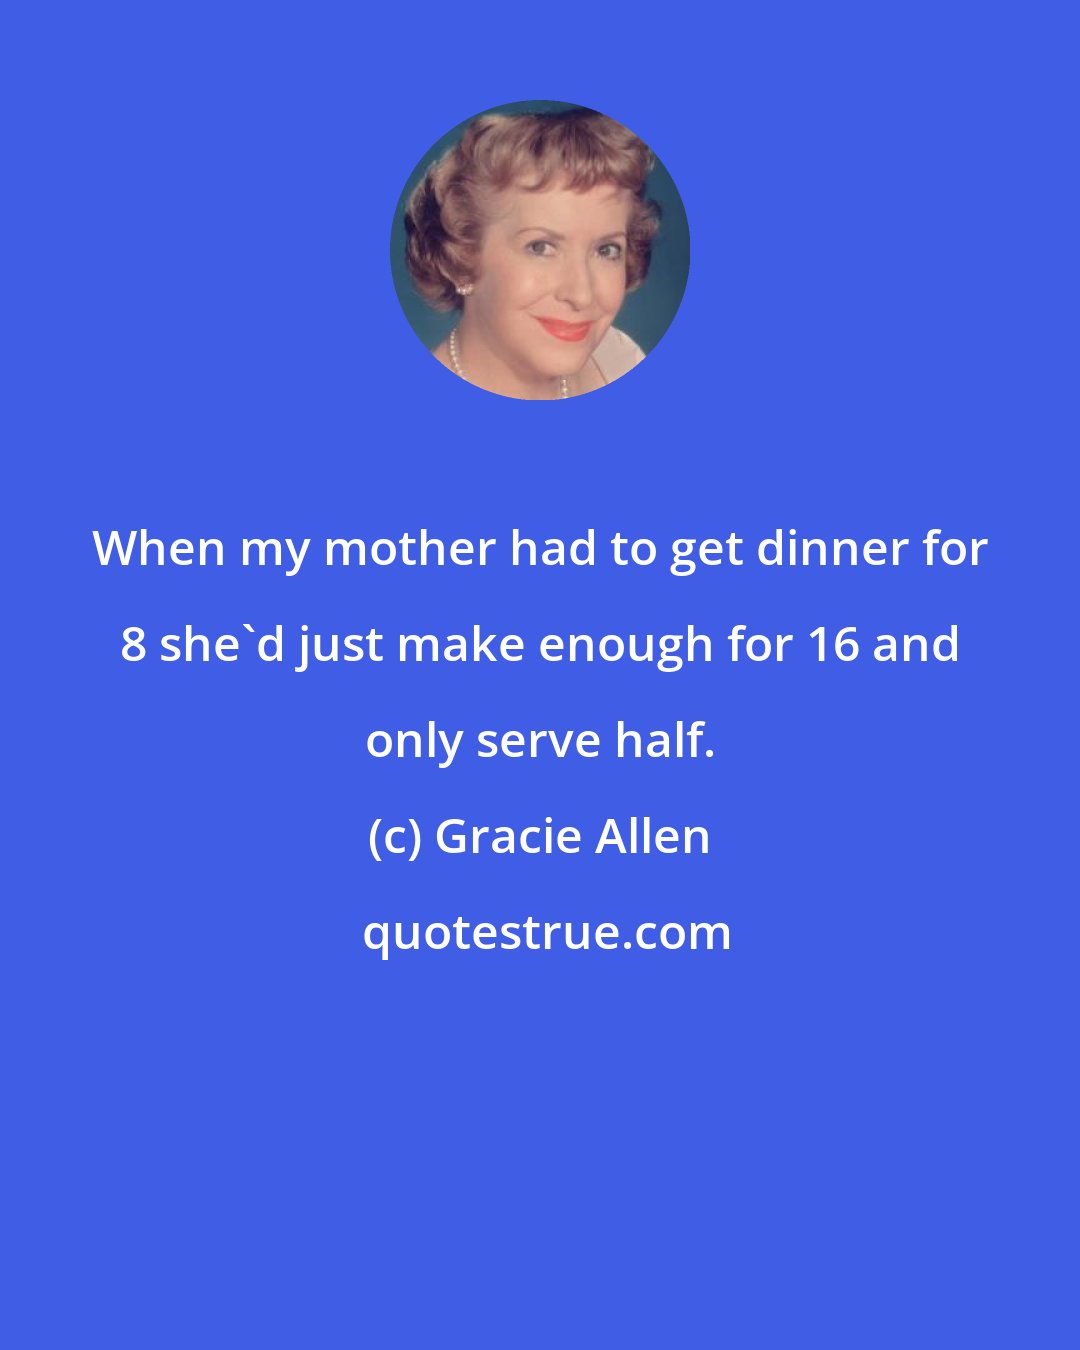 Gracie Allen: When my mother had to get dinner for 8 she'd just make enough for 16 and only serve half.